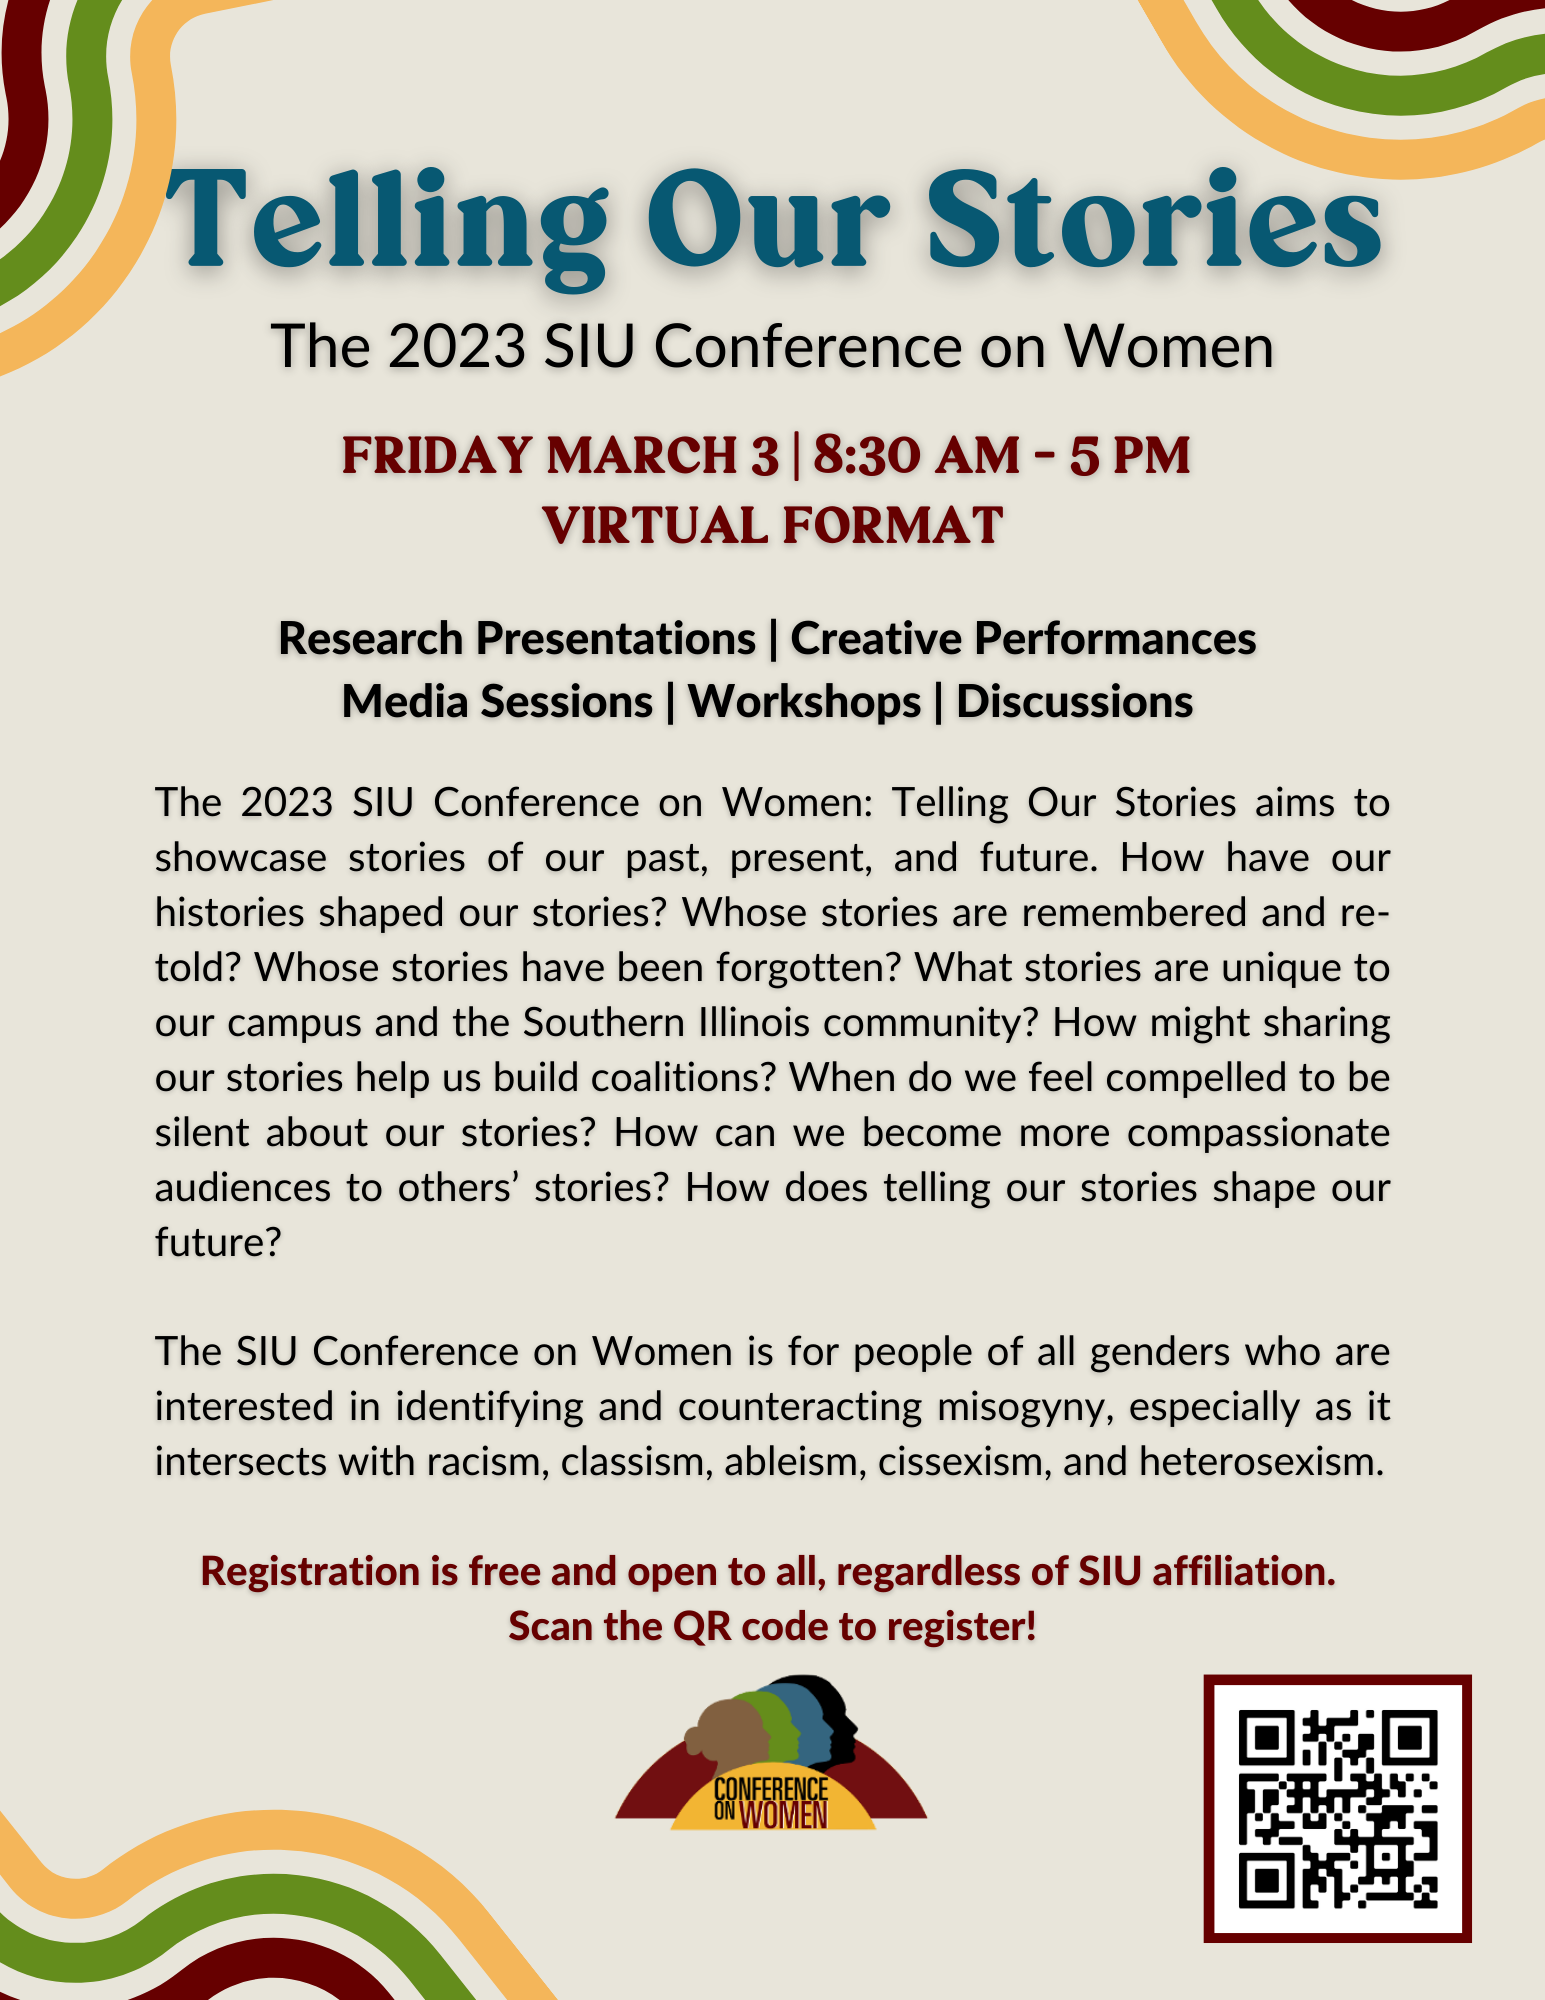 SIU-Conference-on-Women-Telling-Our-Stories-Flyer.png